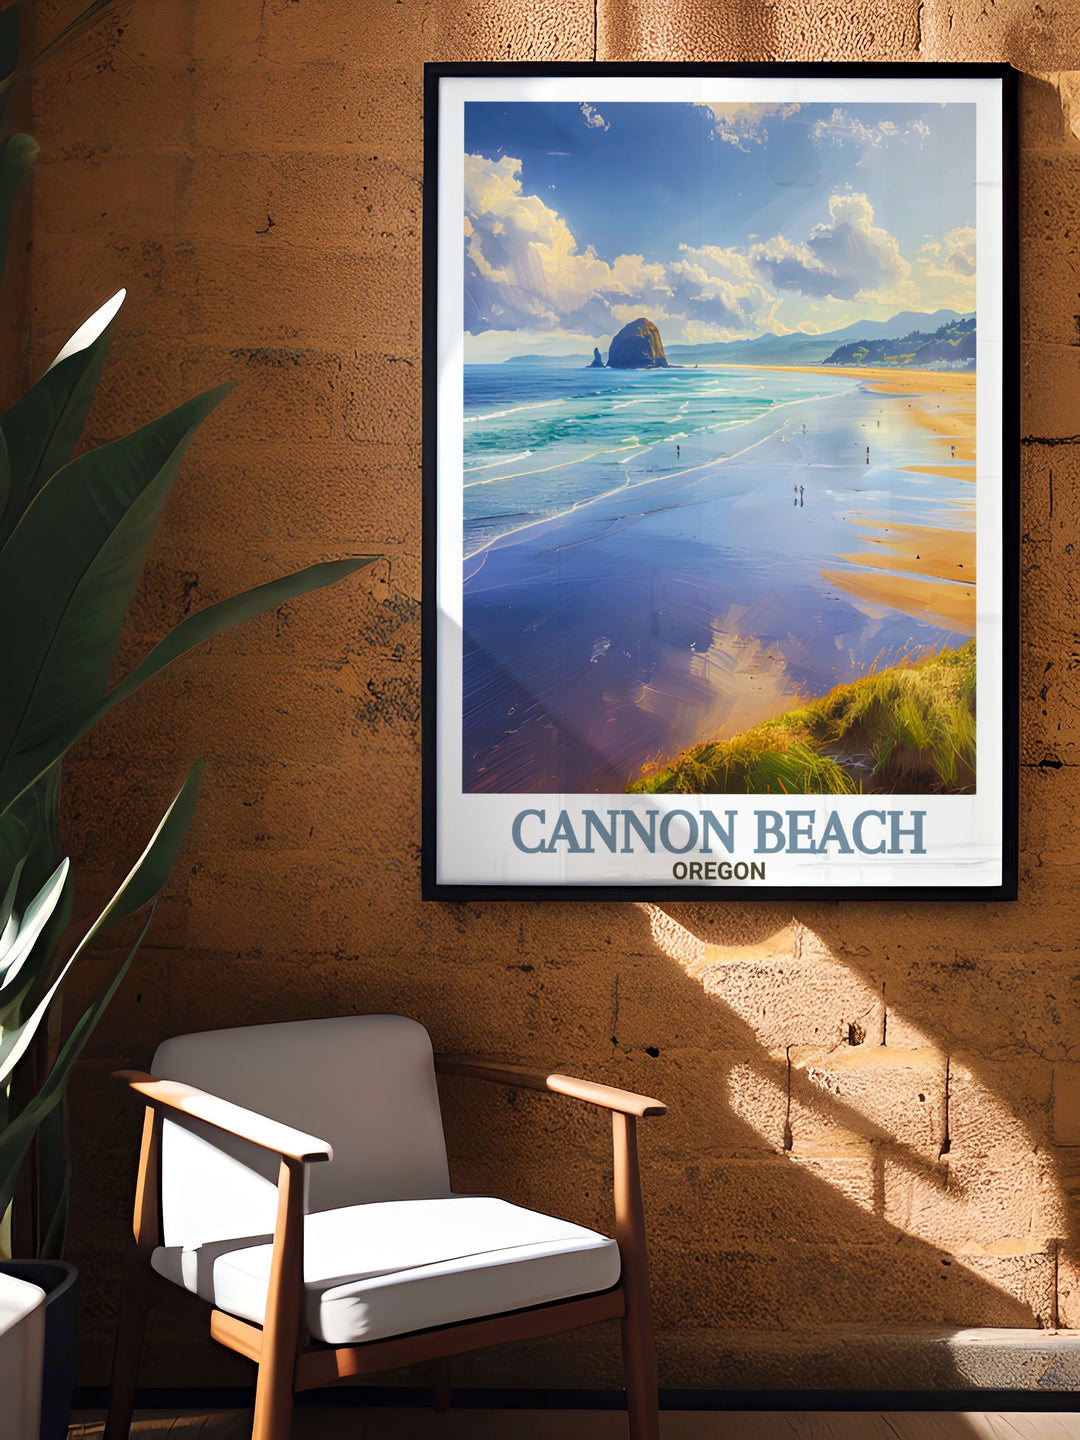 Vibrant Cannon Beach poster showcasing the beauty of the coastal town with colorful art and fine line prints ideal for brightening up any room with its lively depiction